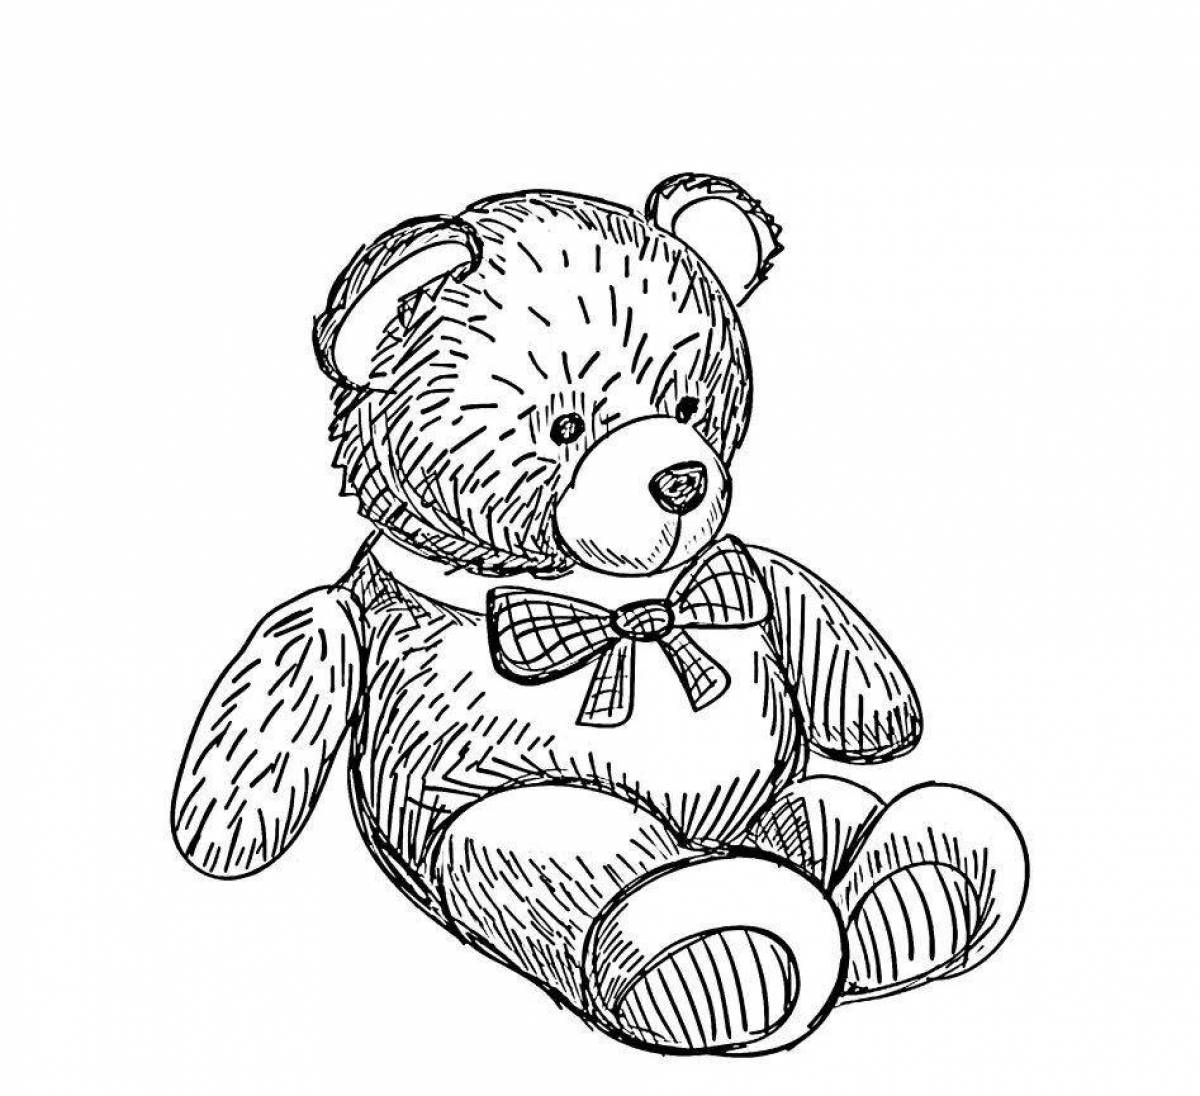 Coloring teddy bear for kids